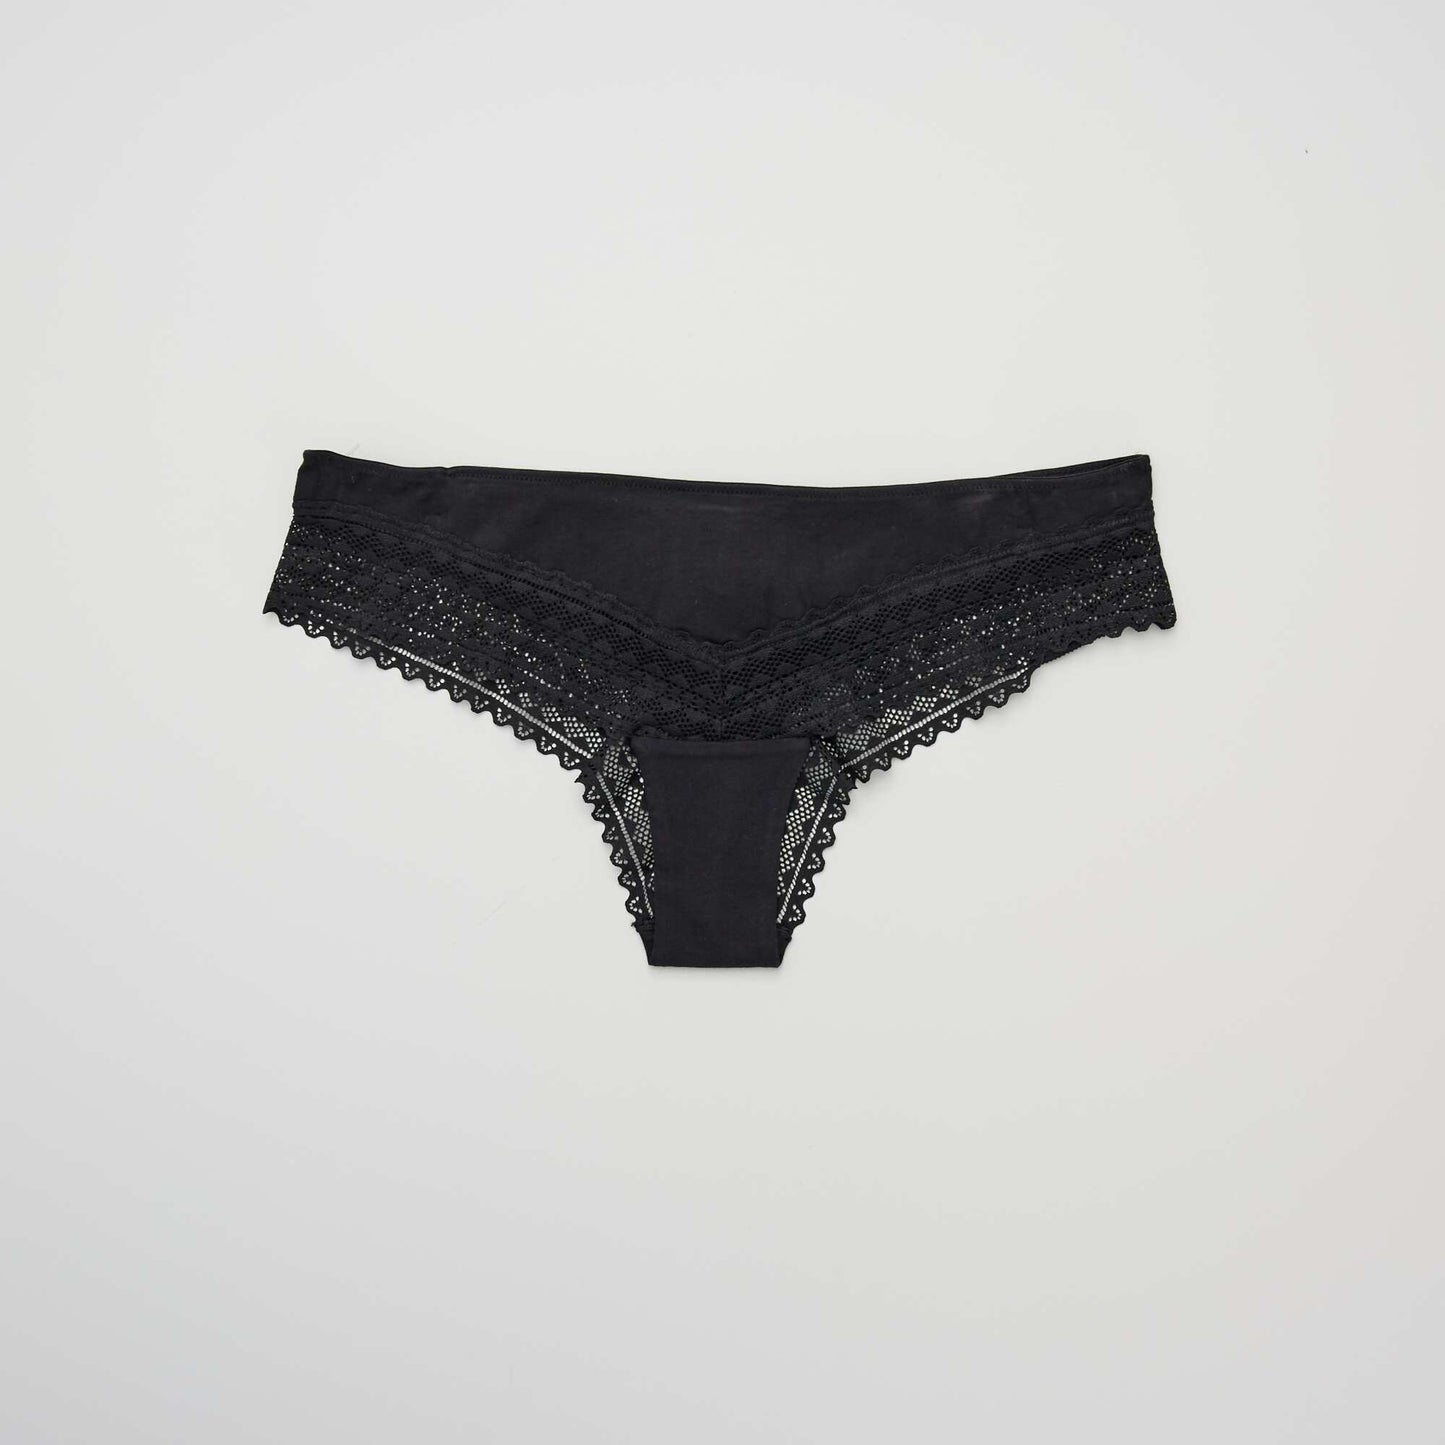 Pack of 3 cotton and lace tanga briefs BLACK